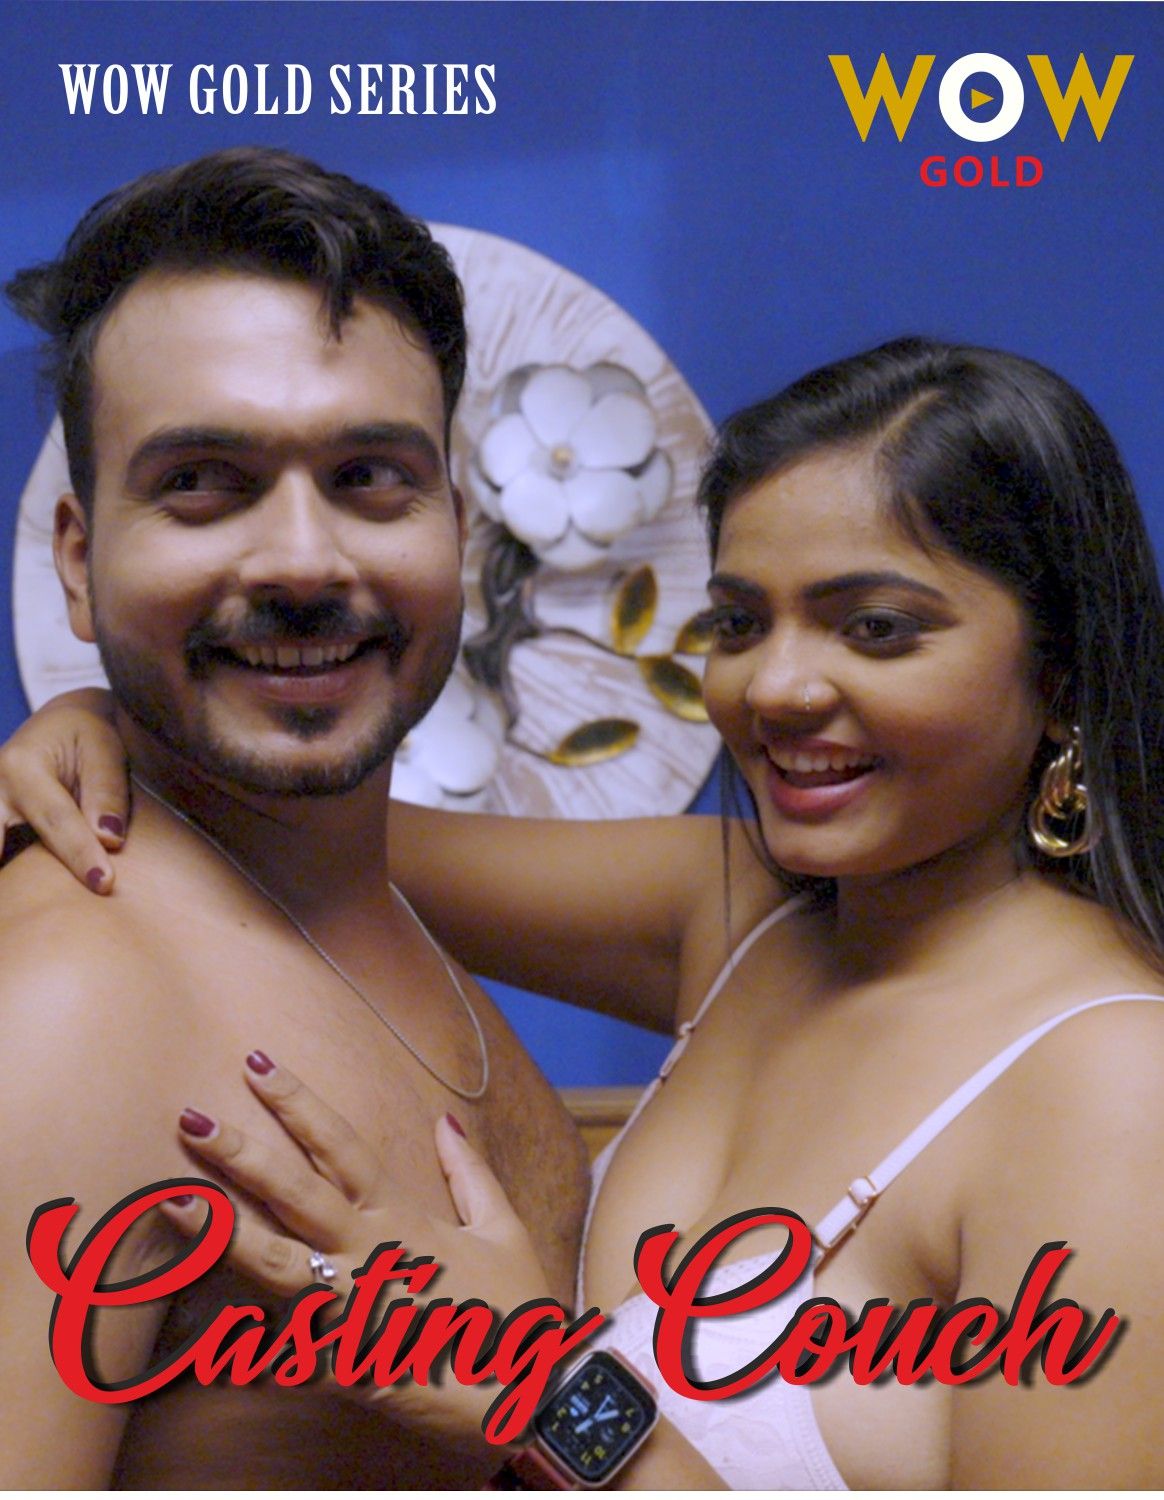 Casting Couch (2023) Season 01 Part 1 Hindi WowGold Web Series download full movie